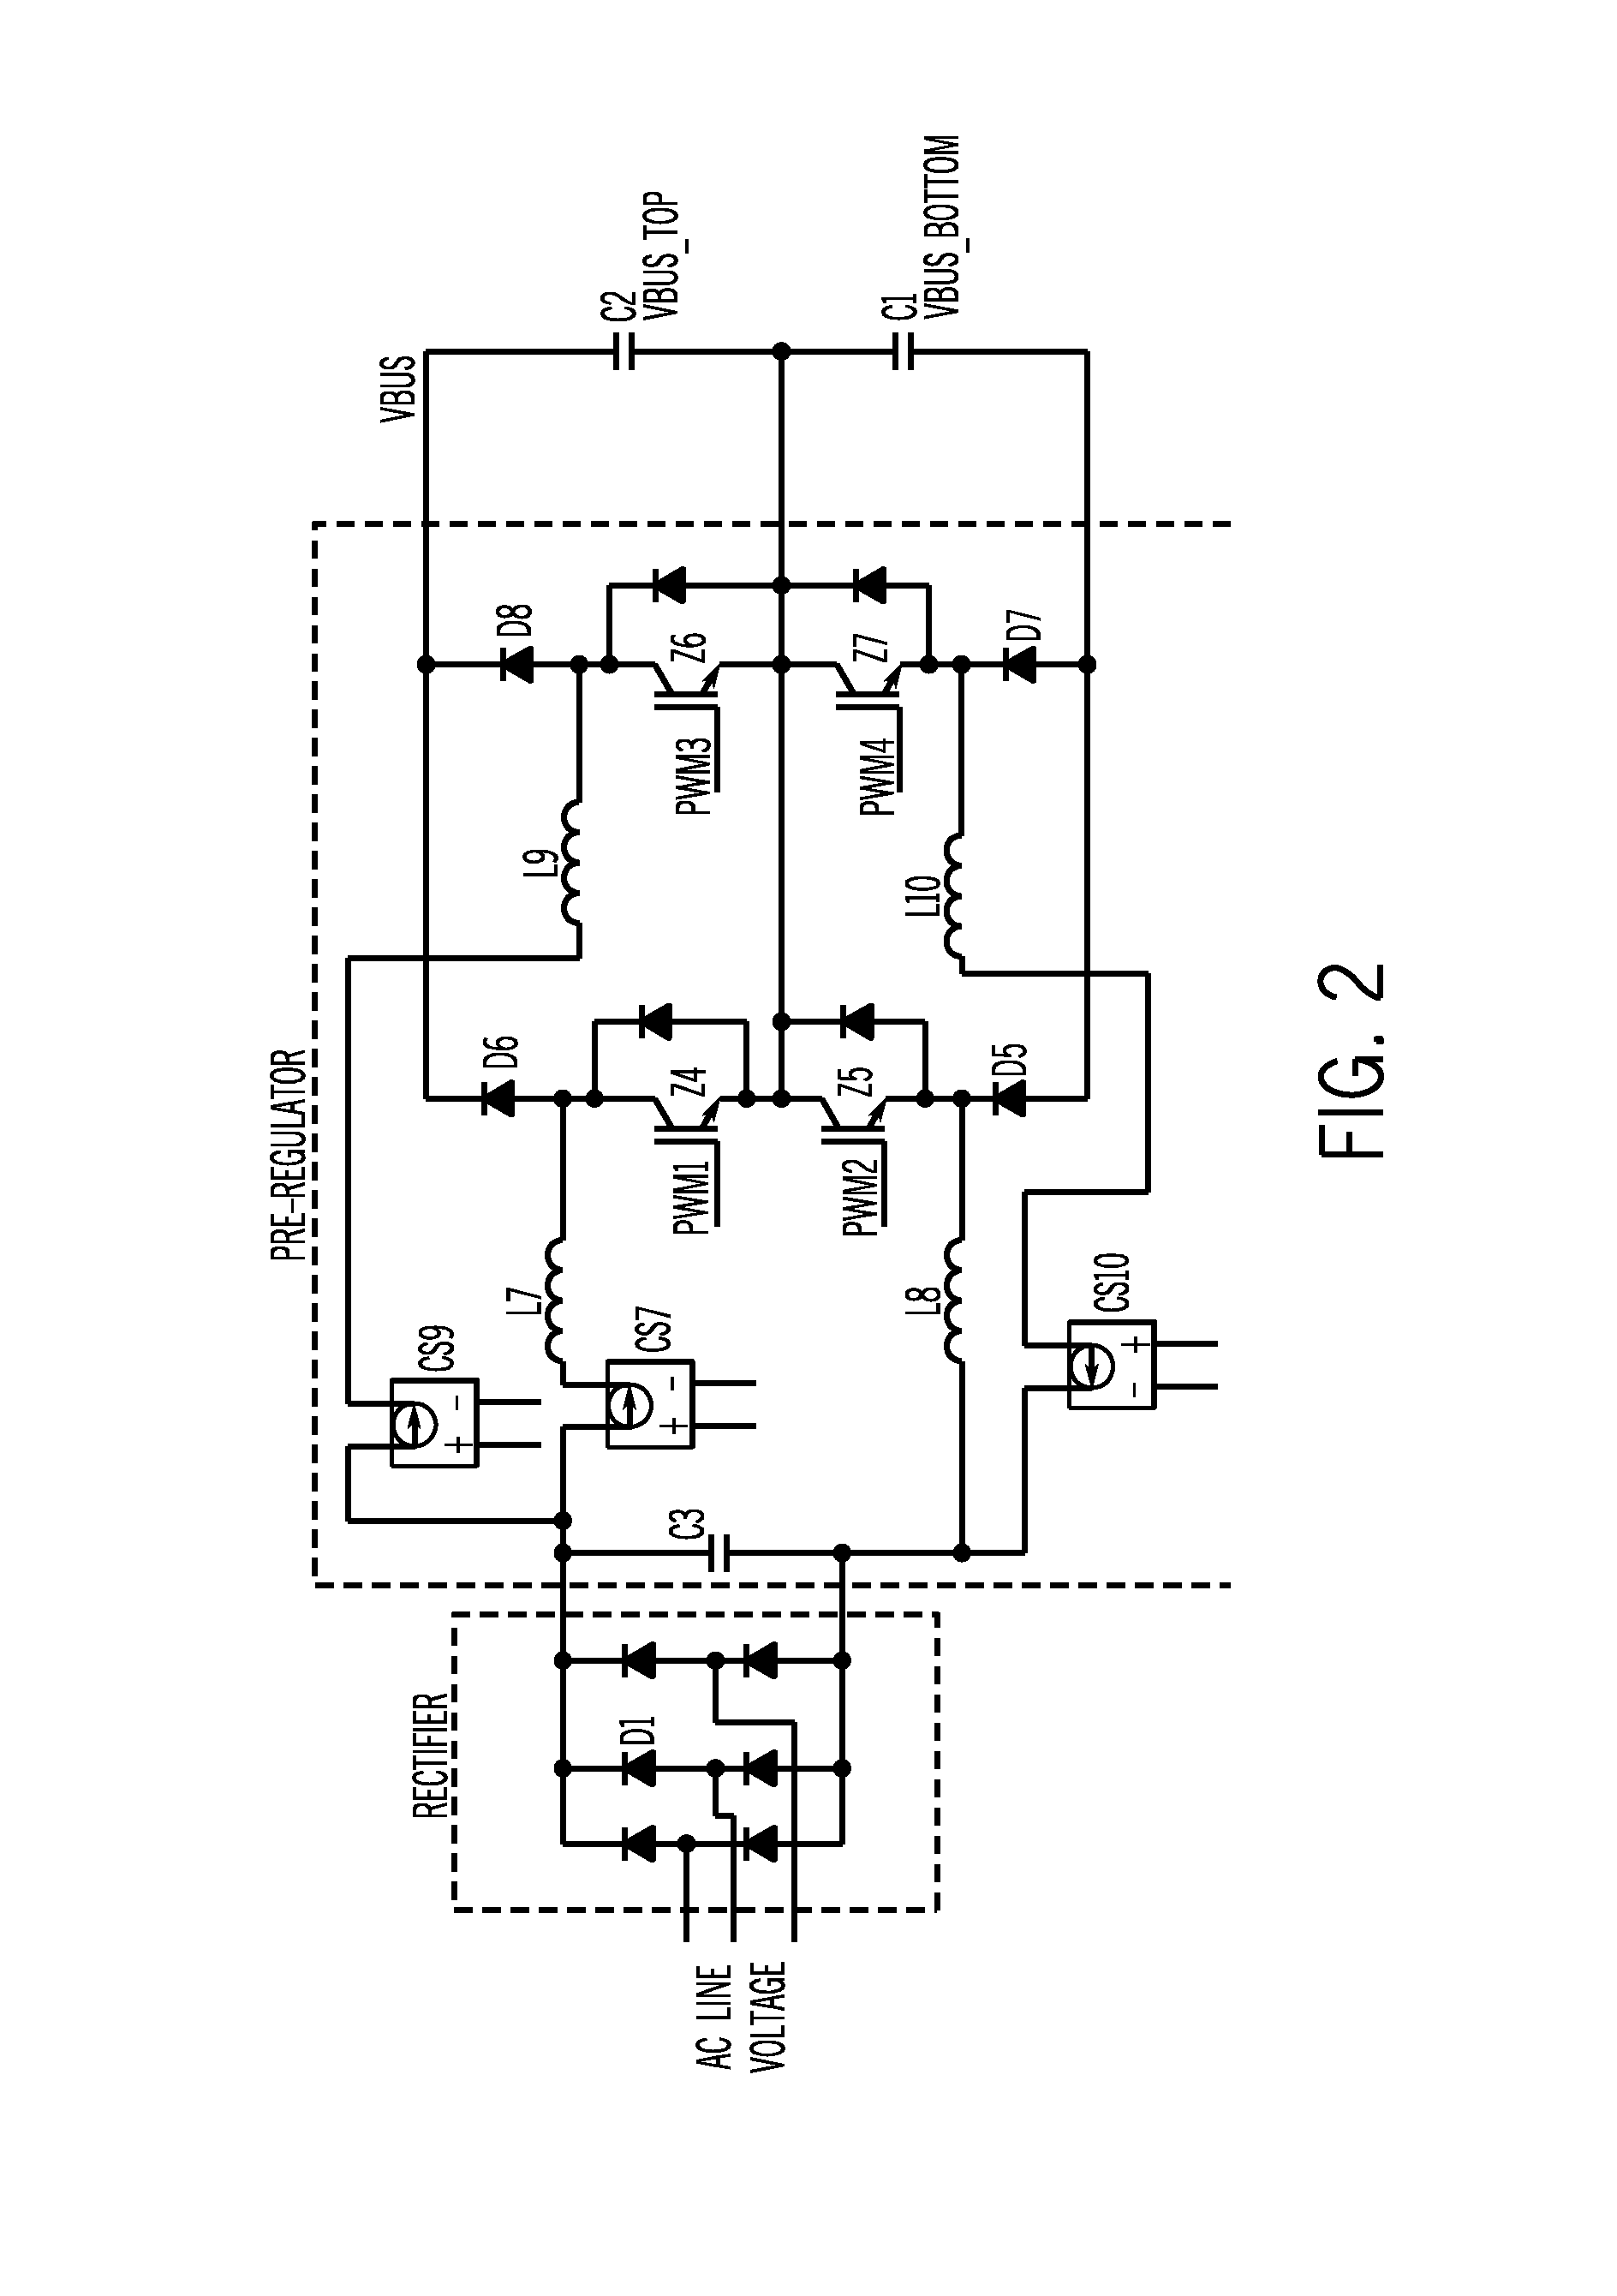 Method and Apparatus For Providing Welding Type Power